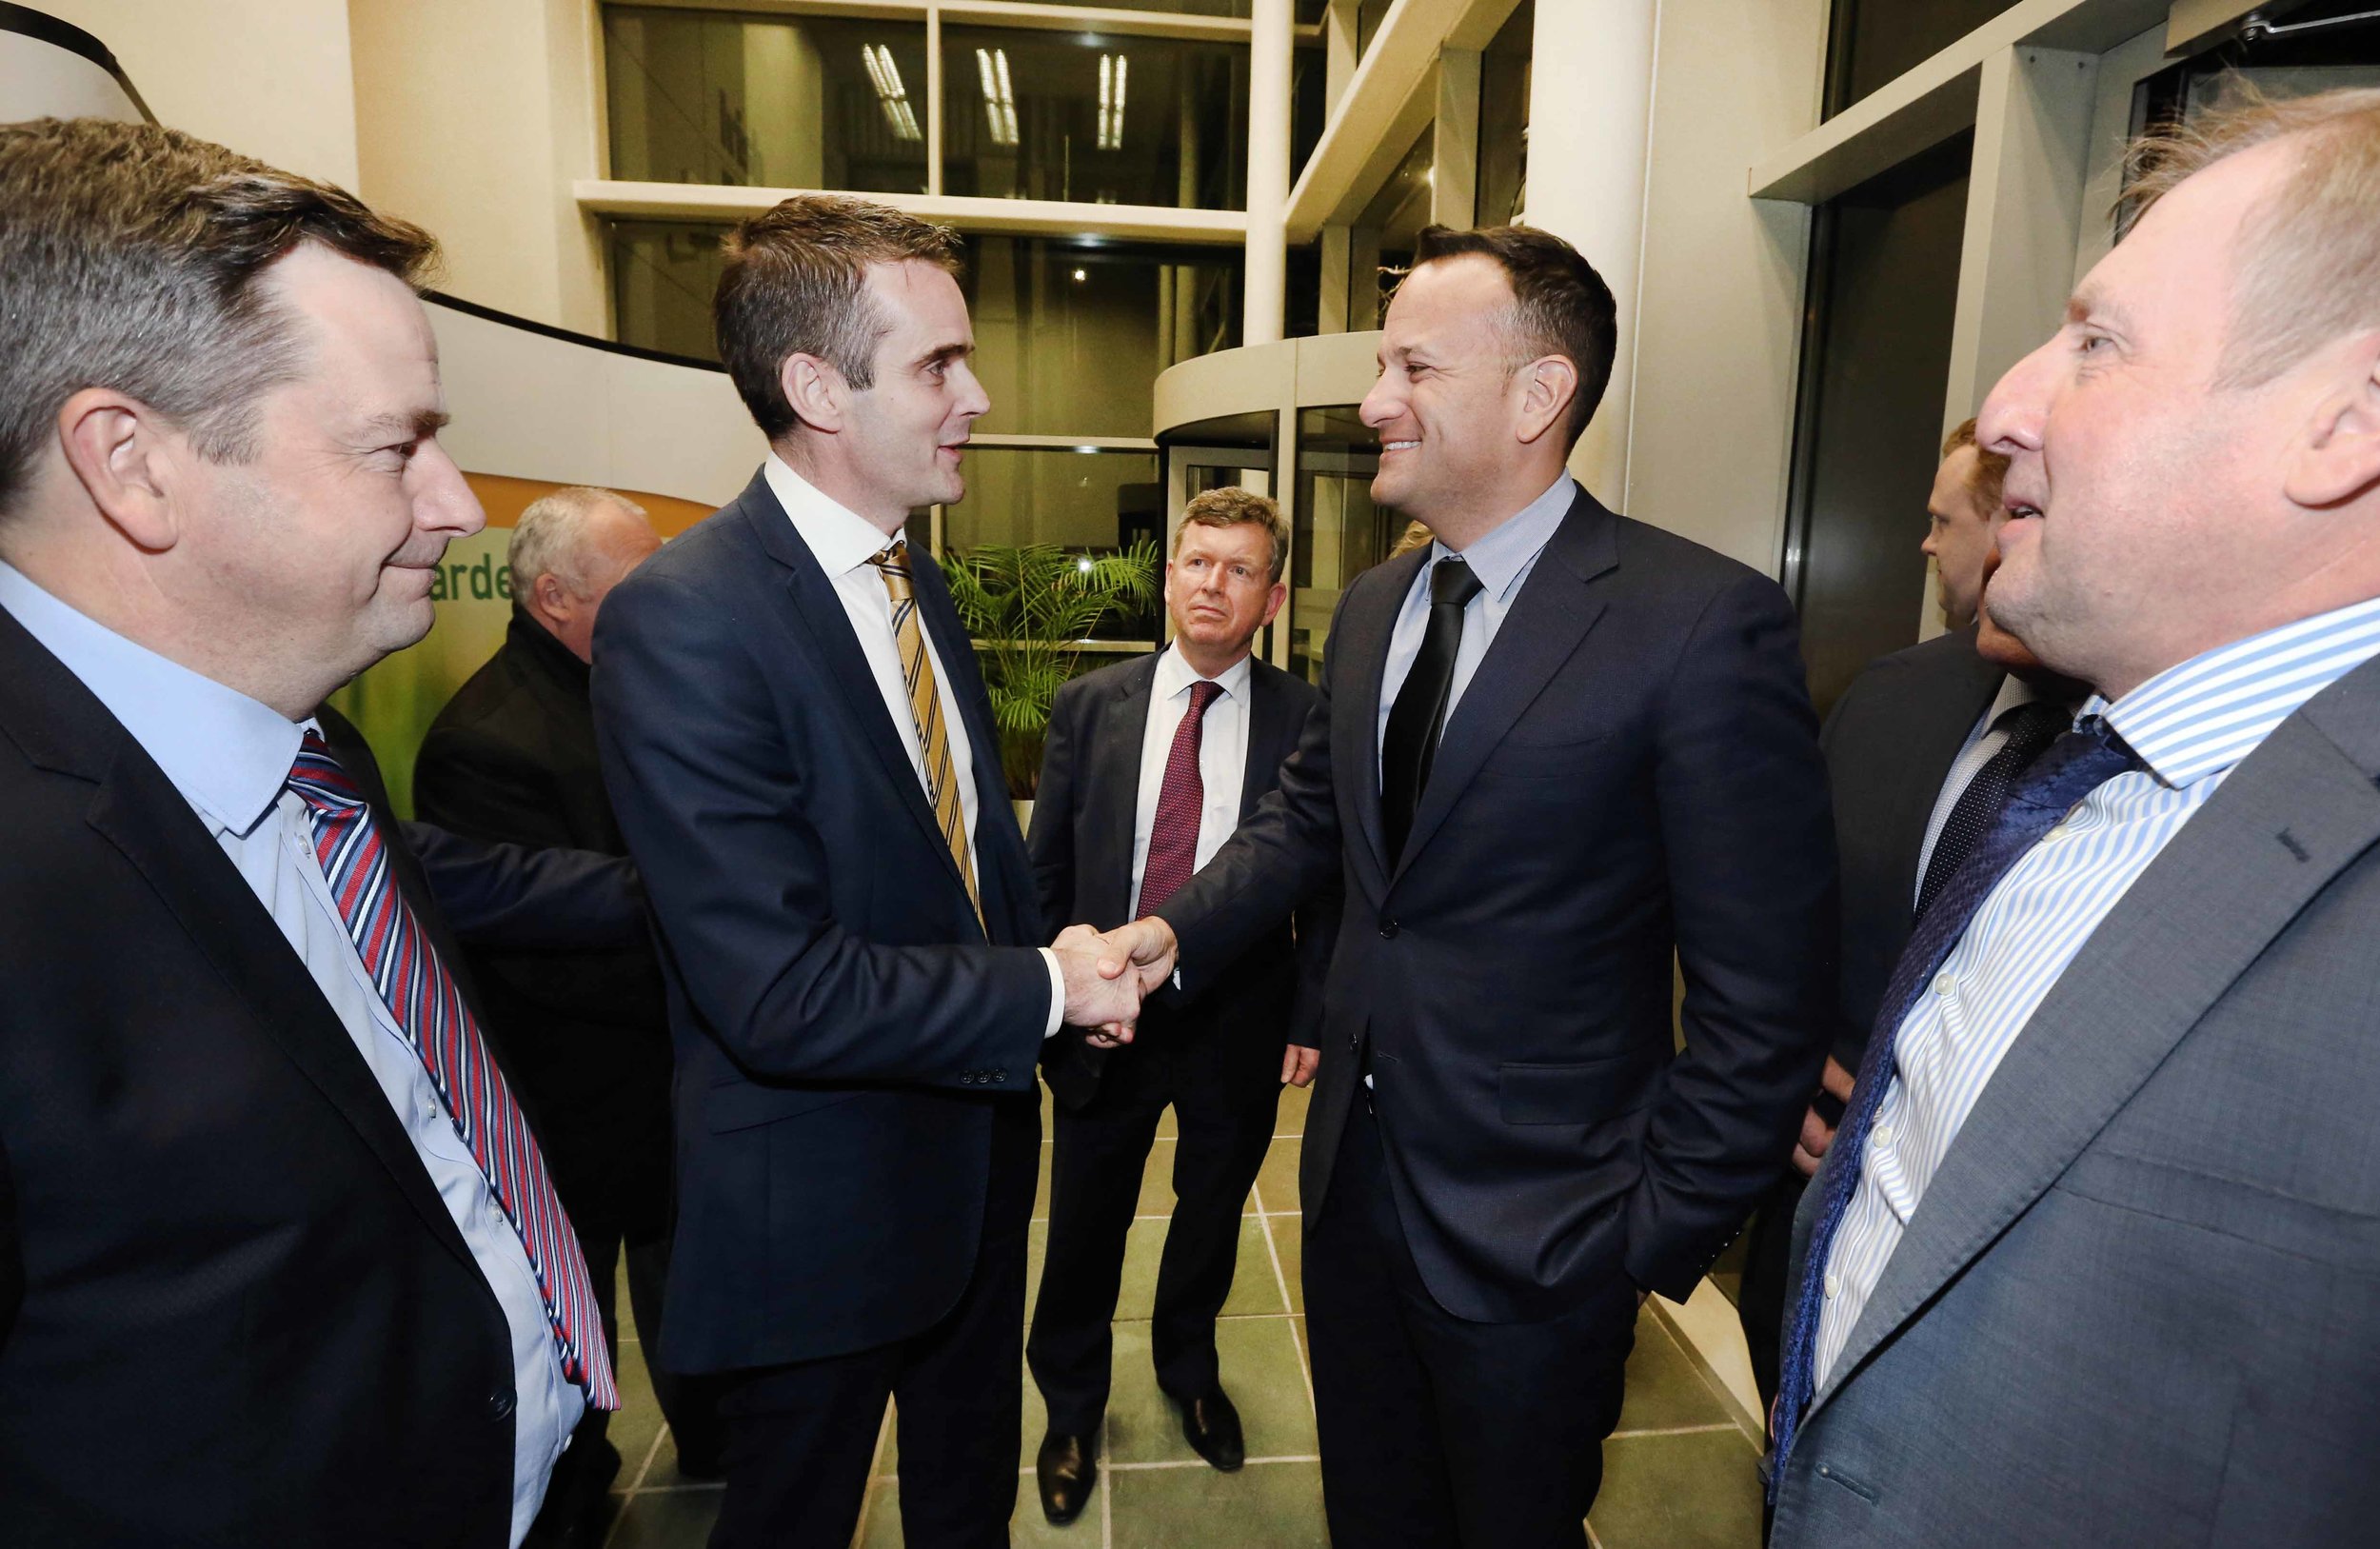  IFA President Joe Healy greets Taoiseach Leo Varadkar to the Farm Centre, flanked by IFA General Secretary Damian McDonald and Ministers for Agriculture Michael Creed. 